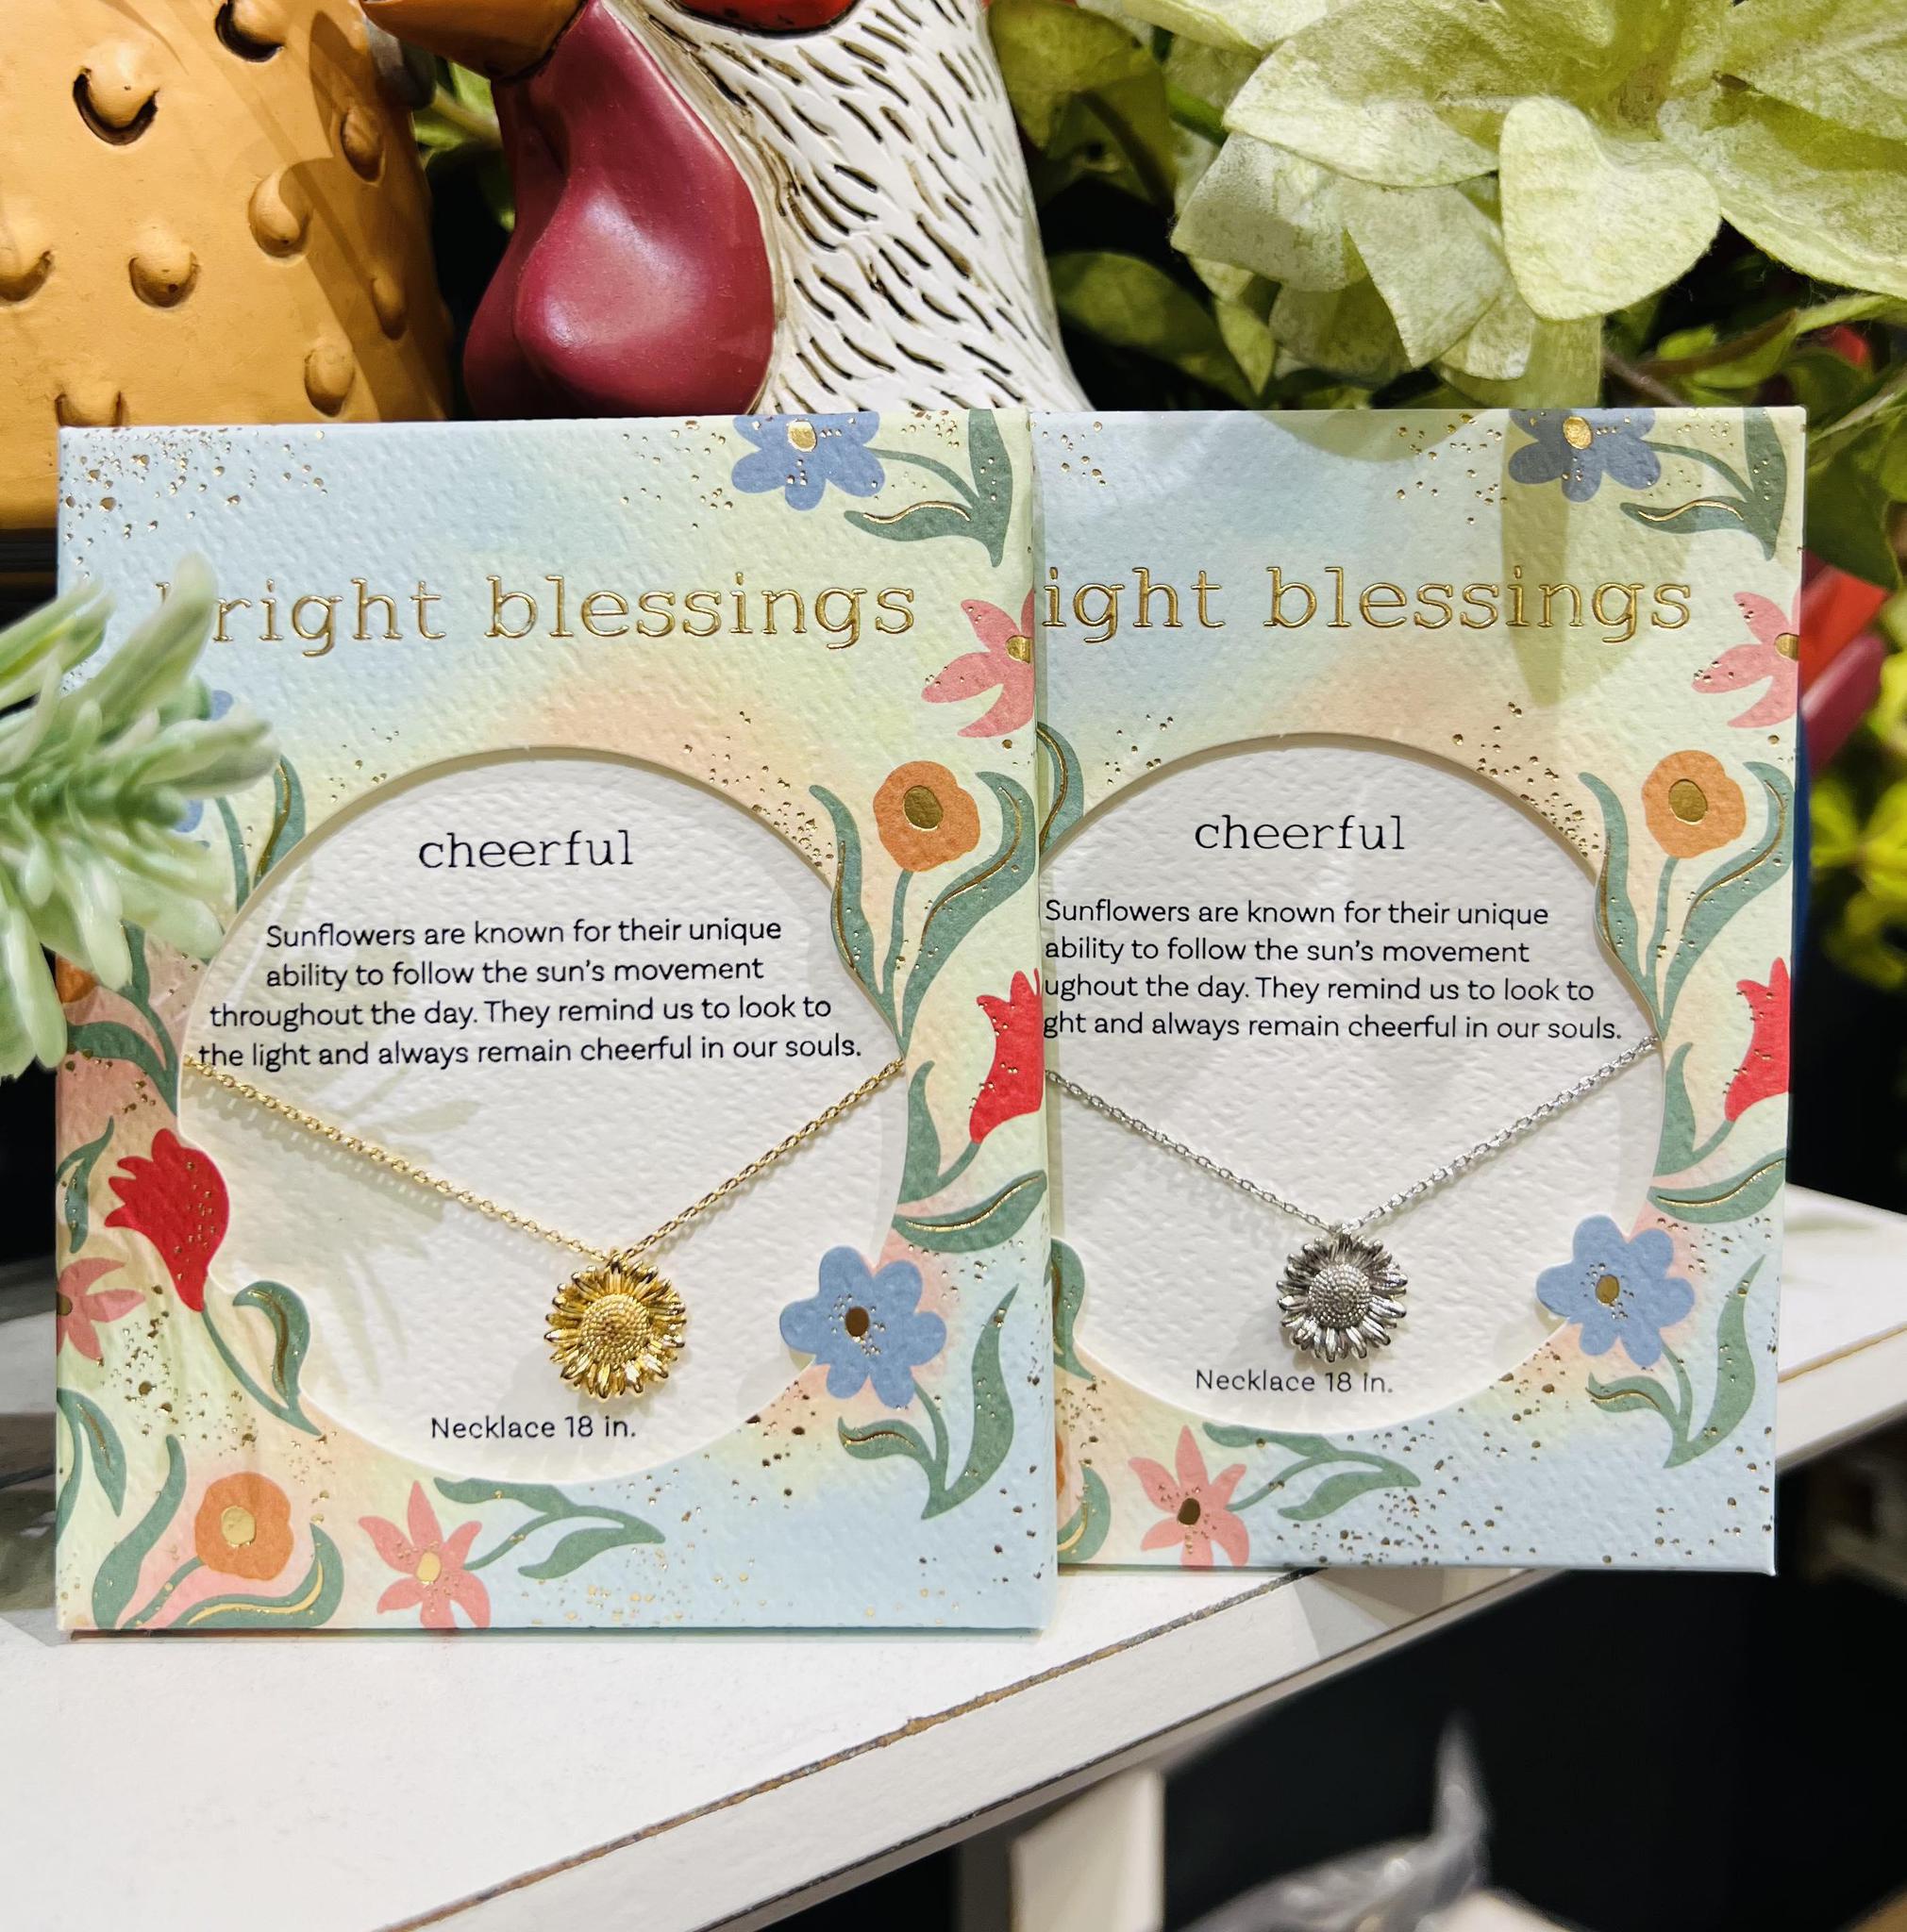 Bright Blessings Cheerful Necklace